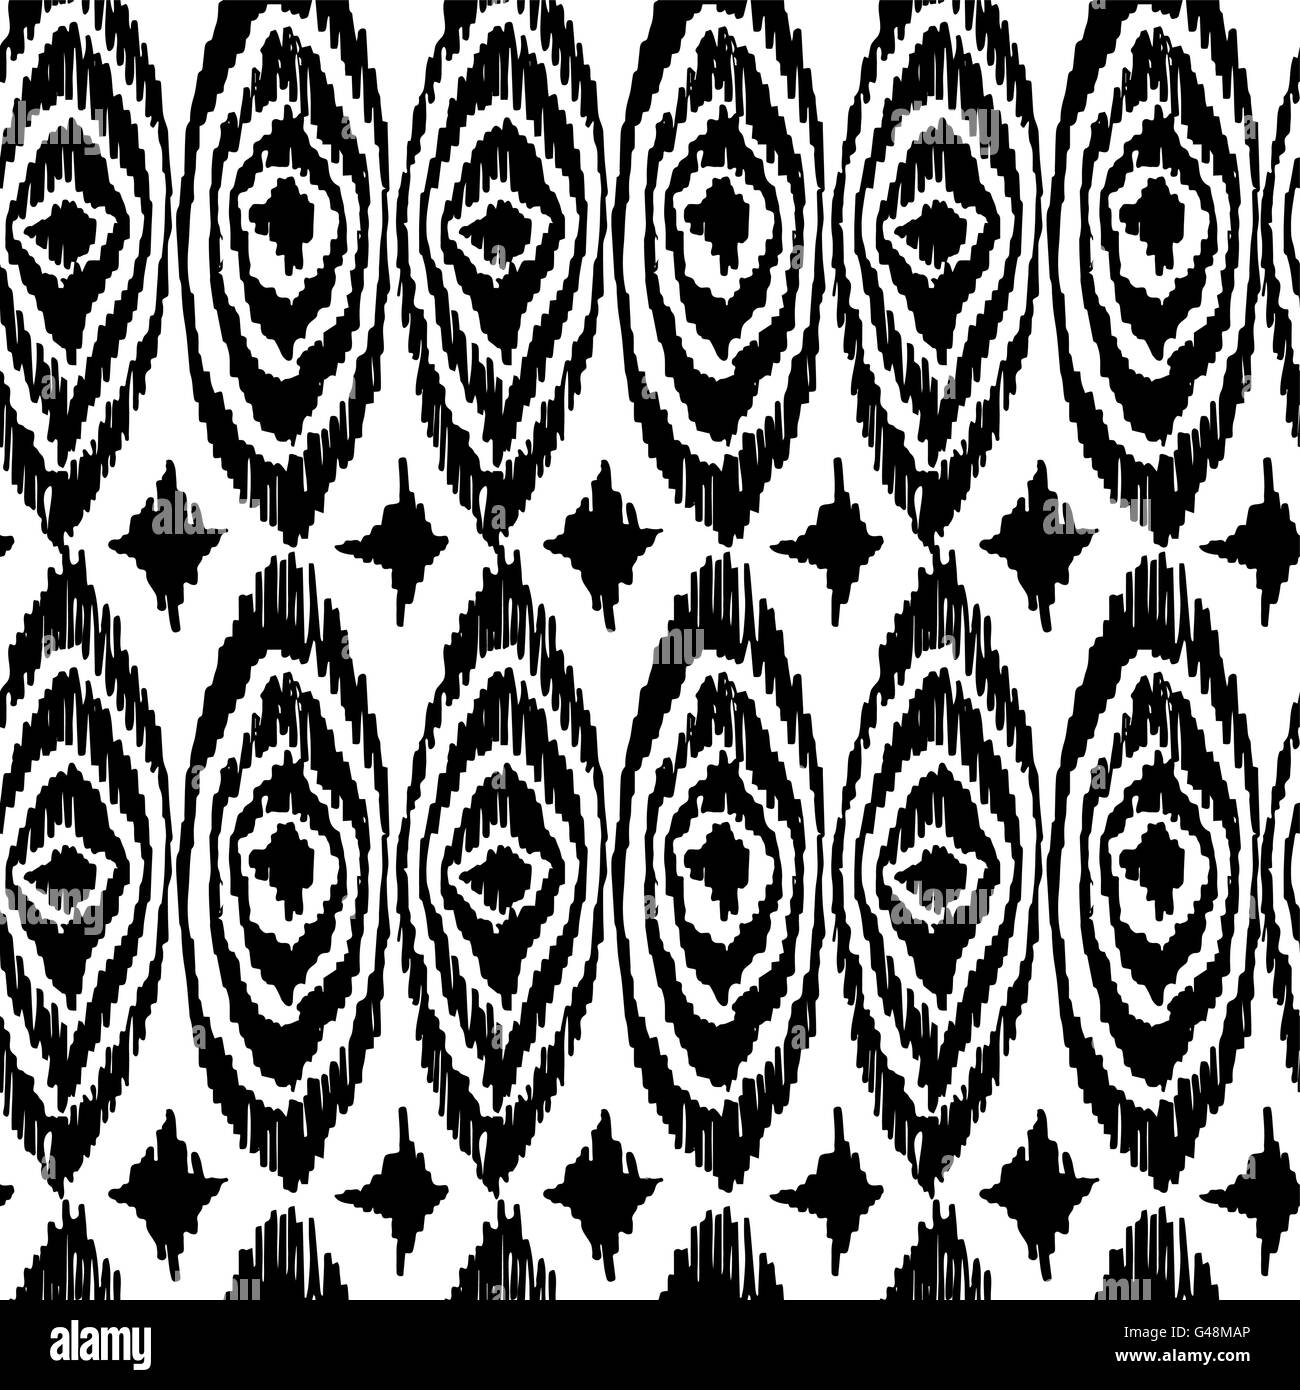 Retro boho black and white seamless pattern background with monochrome tribal or ethnic art. Ideal for fabric design Stock Vector